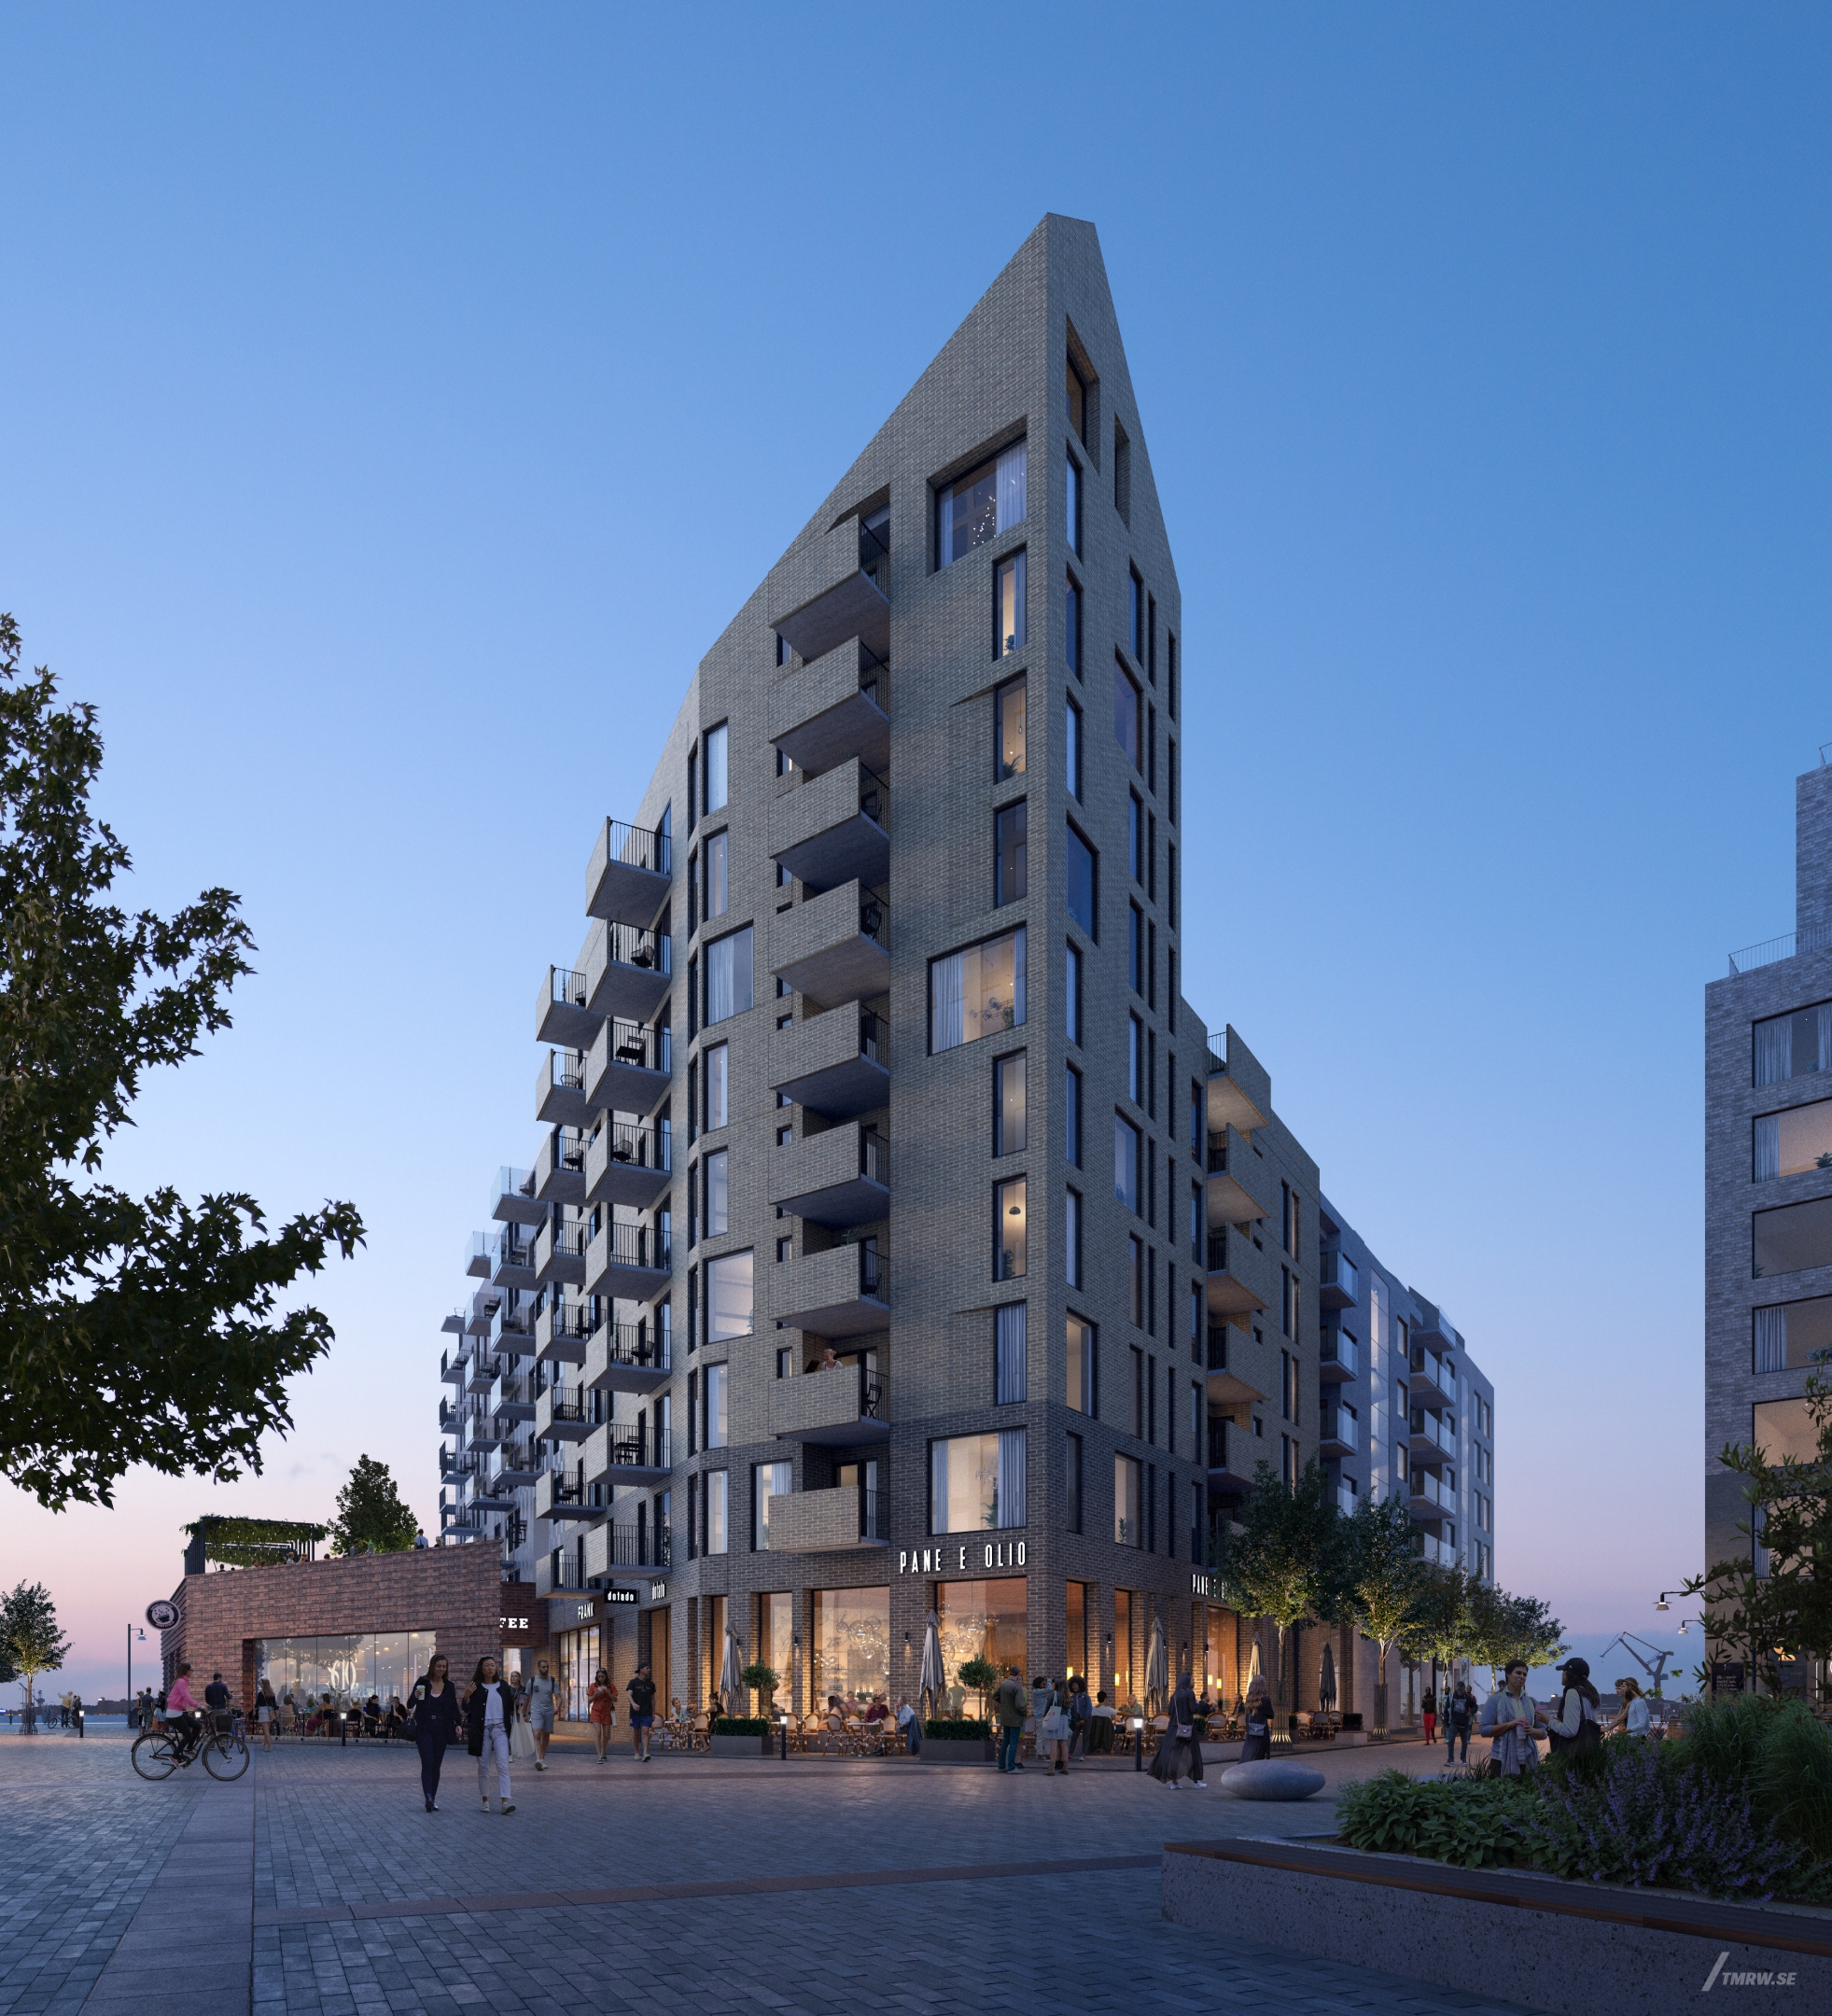 Architectural visualization of Masthuggskajen for Kub/Stena Fastigheter. A image of a residental building in dusk from street view.